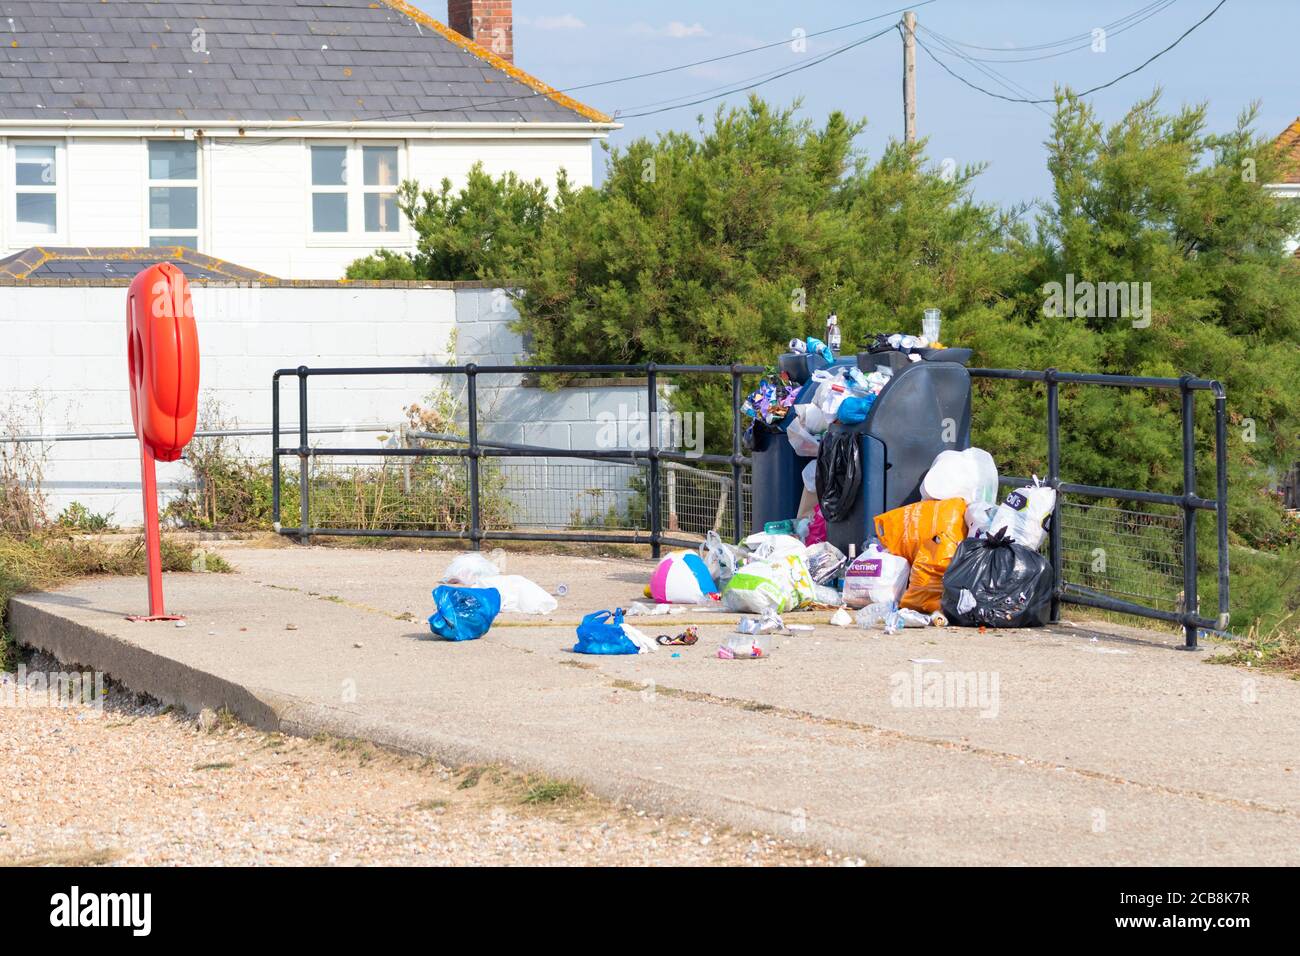 Piles of rubbish litter left on beach promenade, camber, east sussex, uk Stock Photo